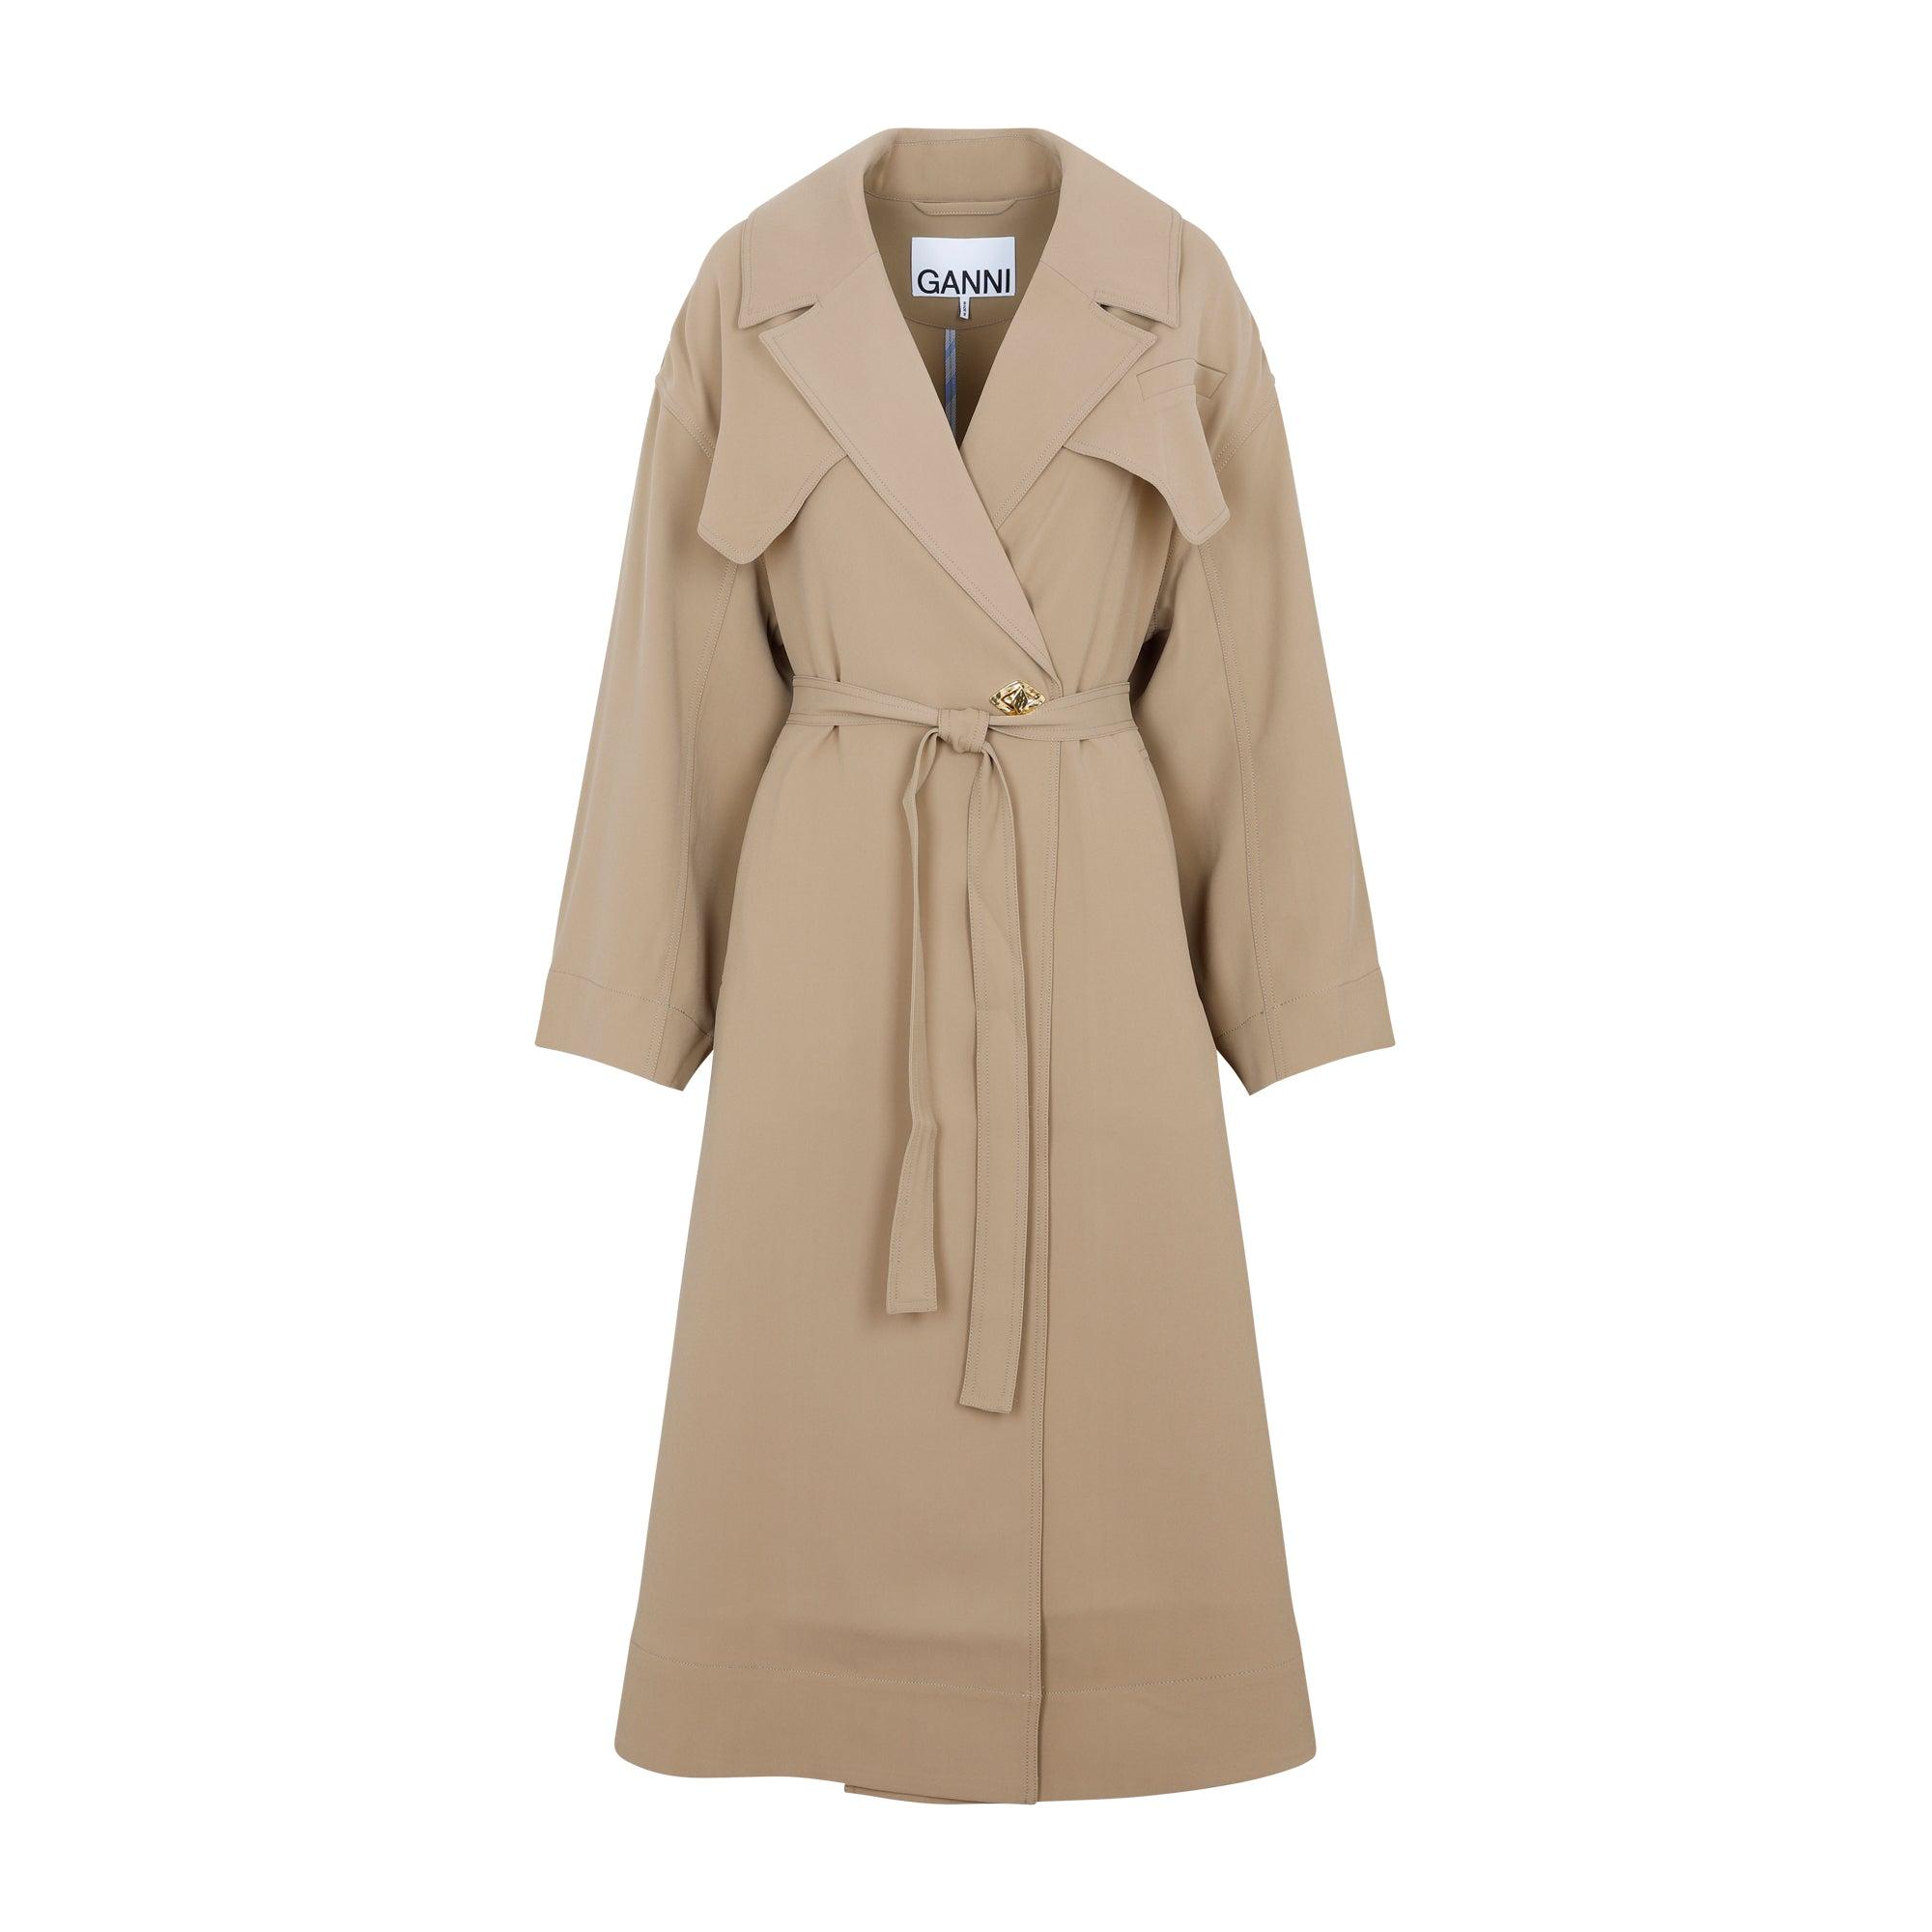 Ganni Drapey Trench Long Jacket Coat in Natural | Lyst